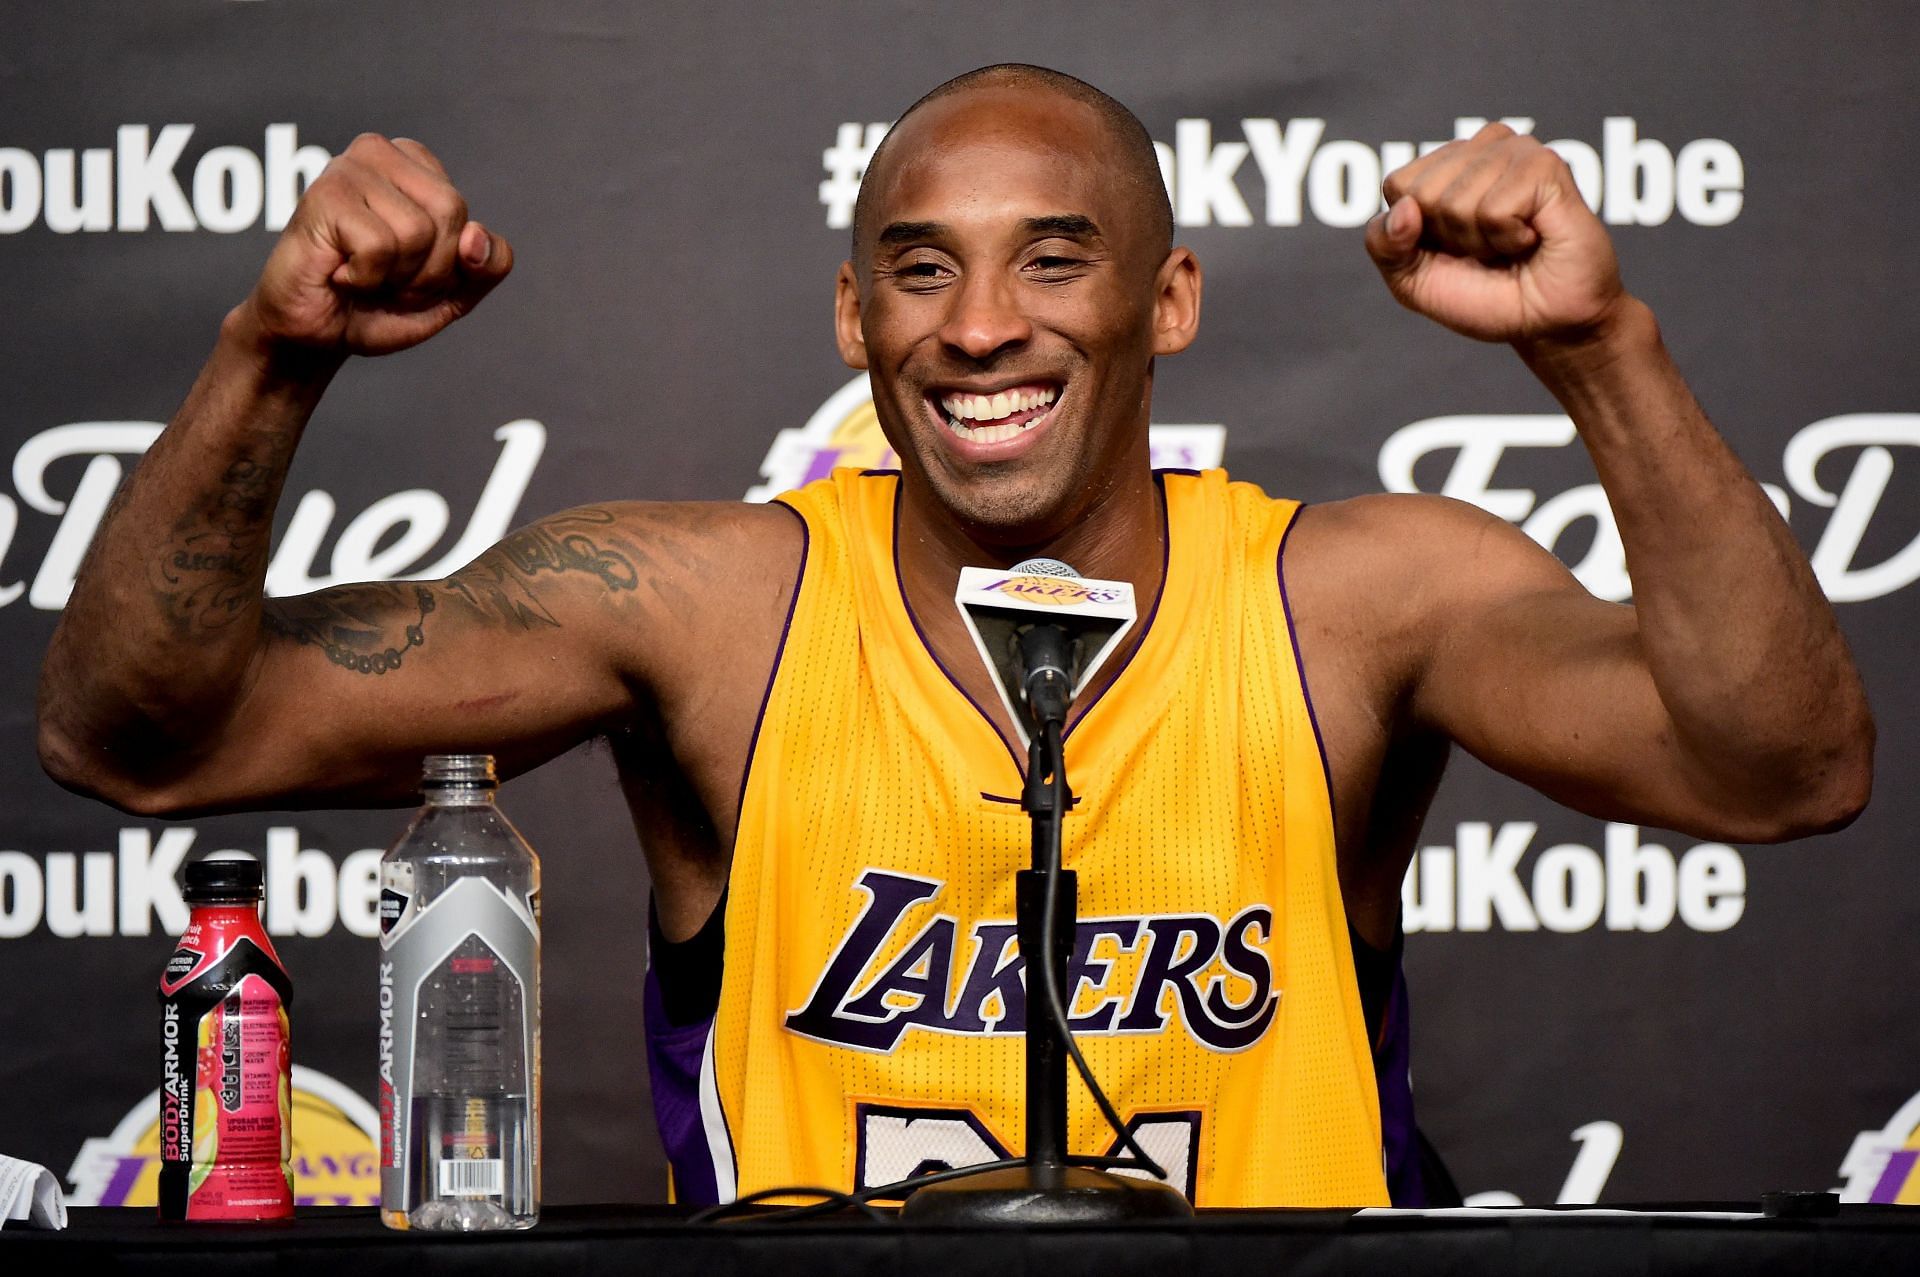 Kobe Bryant of the LA Lakers after his final NBA game